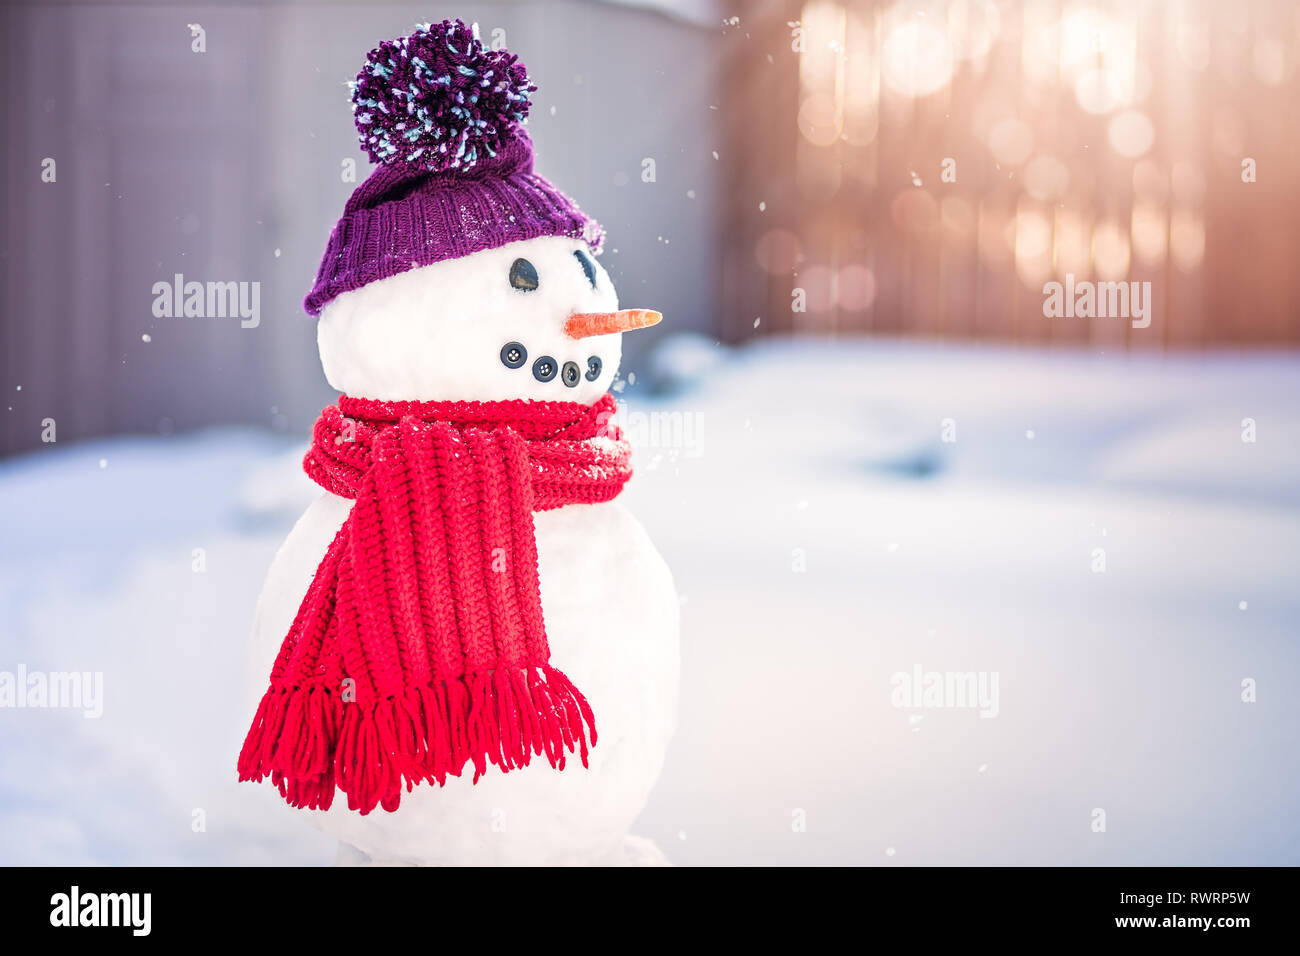 Smiling snowman with purple hat and red scarf Stock Photo